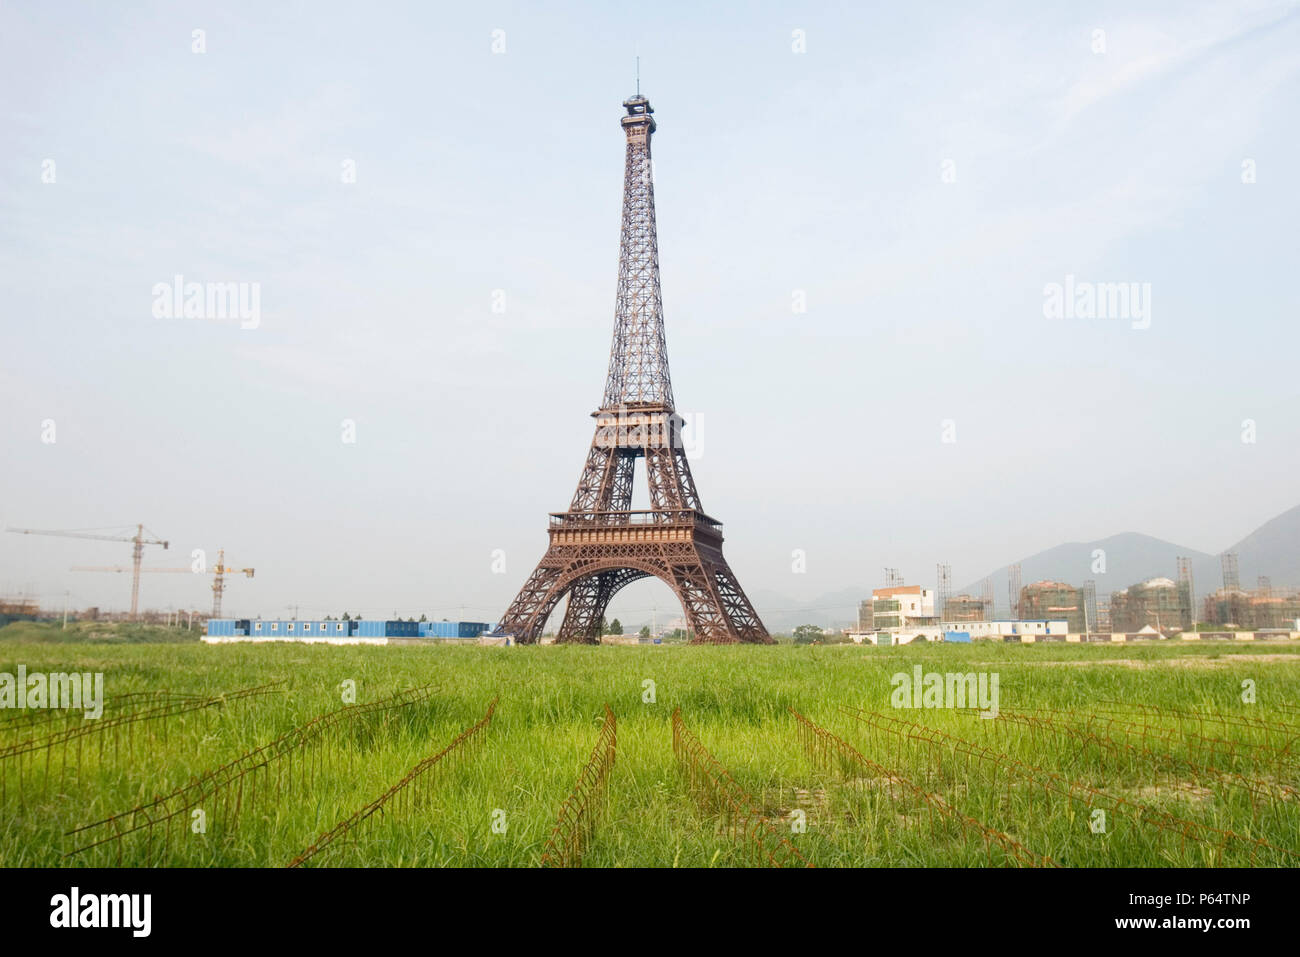 The Eiffel Tower… in China - Montreal